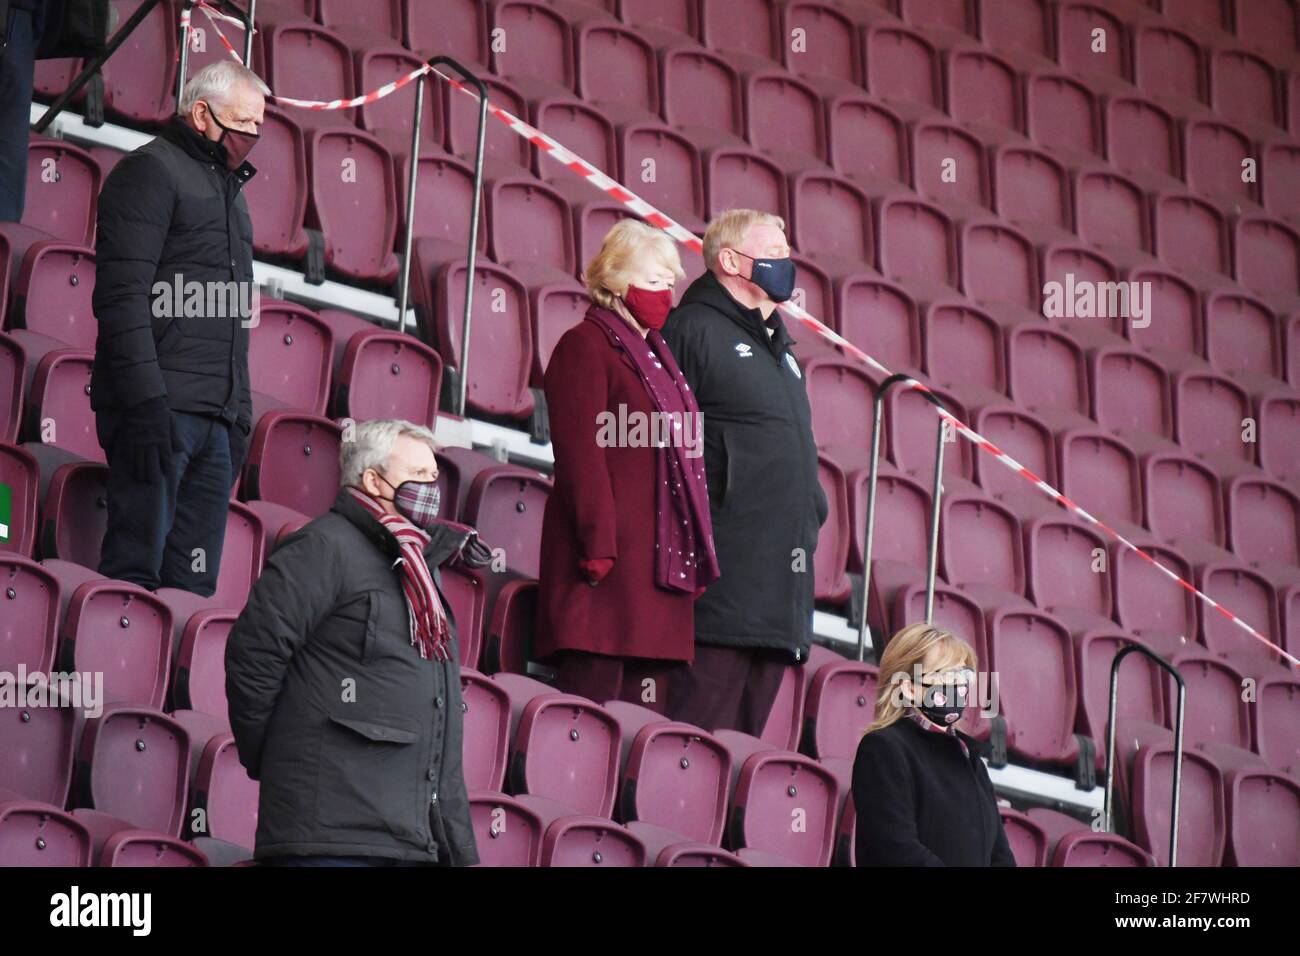 Tynecastle Park, Edinburgh, Scotland. UK. 9th April 21. Scottish Championship Match.Hearts vs Alloa Hearts owner Ann Budge & Partner Eric Hogg minute's silence before their game (Friday ) as a mark of respect for Prince Philip. Credit: eric mccowat/Alamy Live News Stock Photo